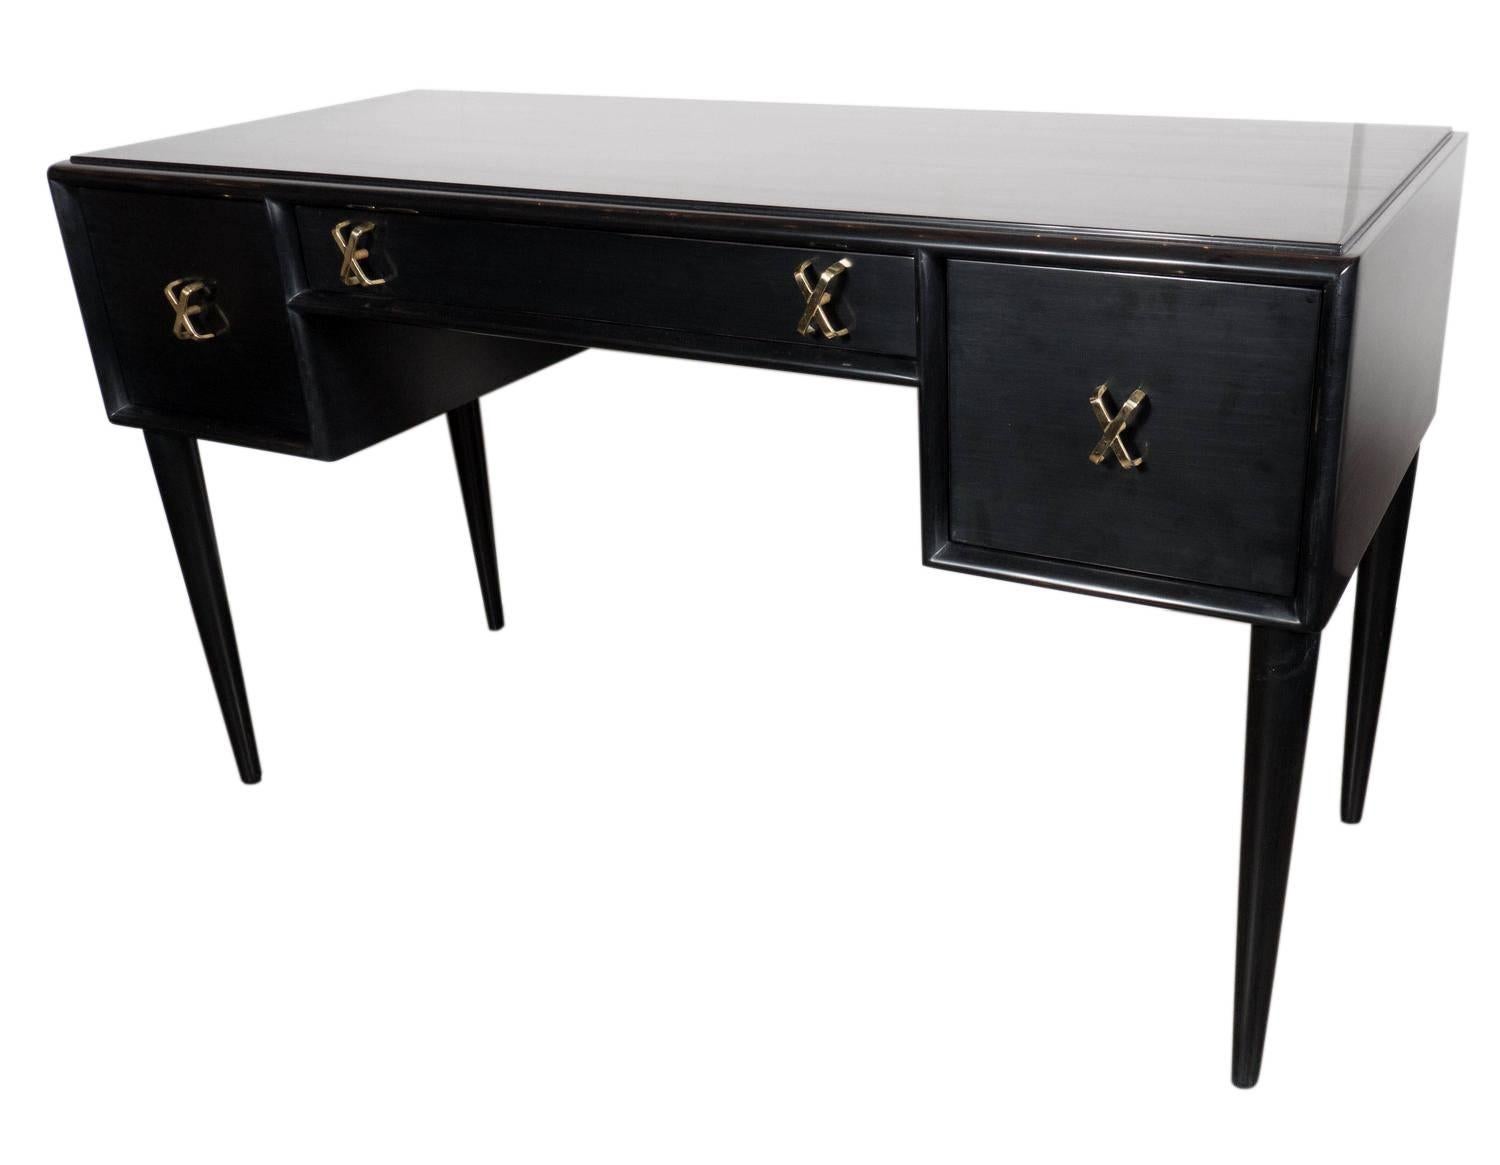 Elegant desk or vanity designed by Paul Frankl for Johnson Furniture, American, circa 1950s. This piece is currently being refinished and can be completed in your choice of color. The price noted includes refinishing in your choice of color. The